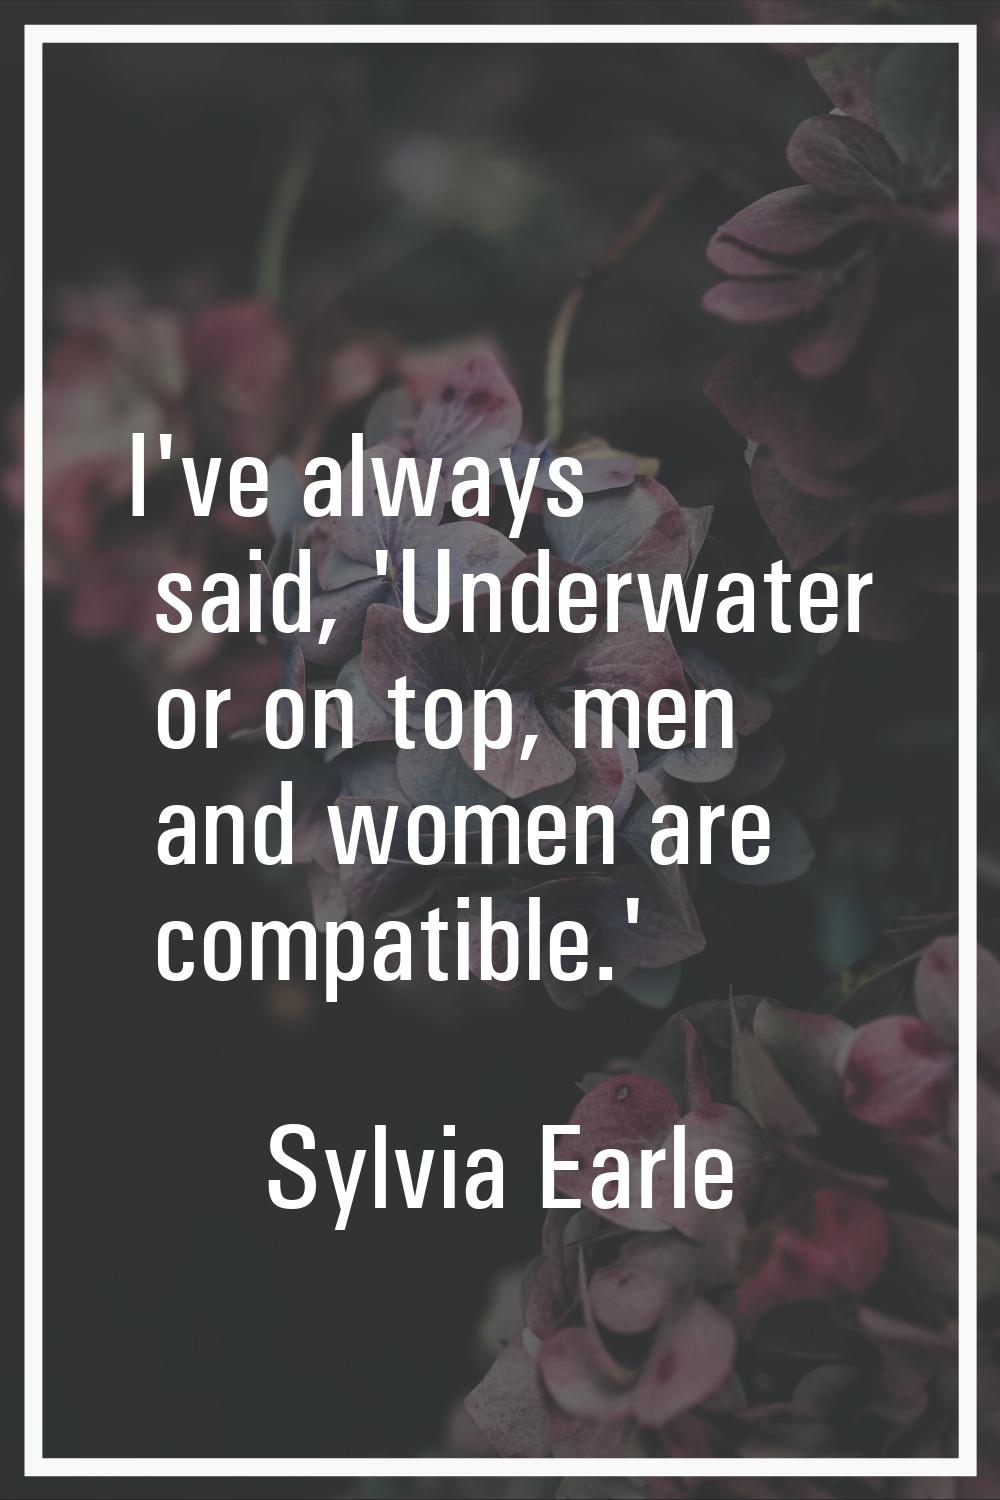 I've always said, 'Underwater or on top, men and women are compatible.'